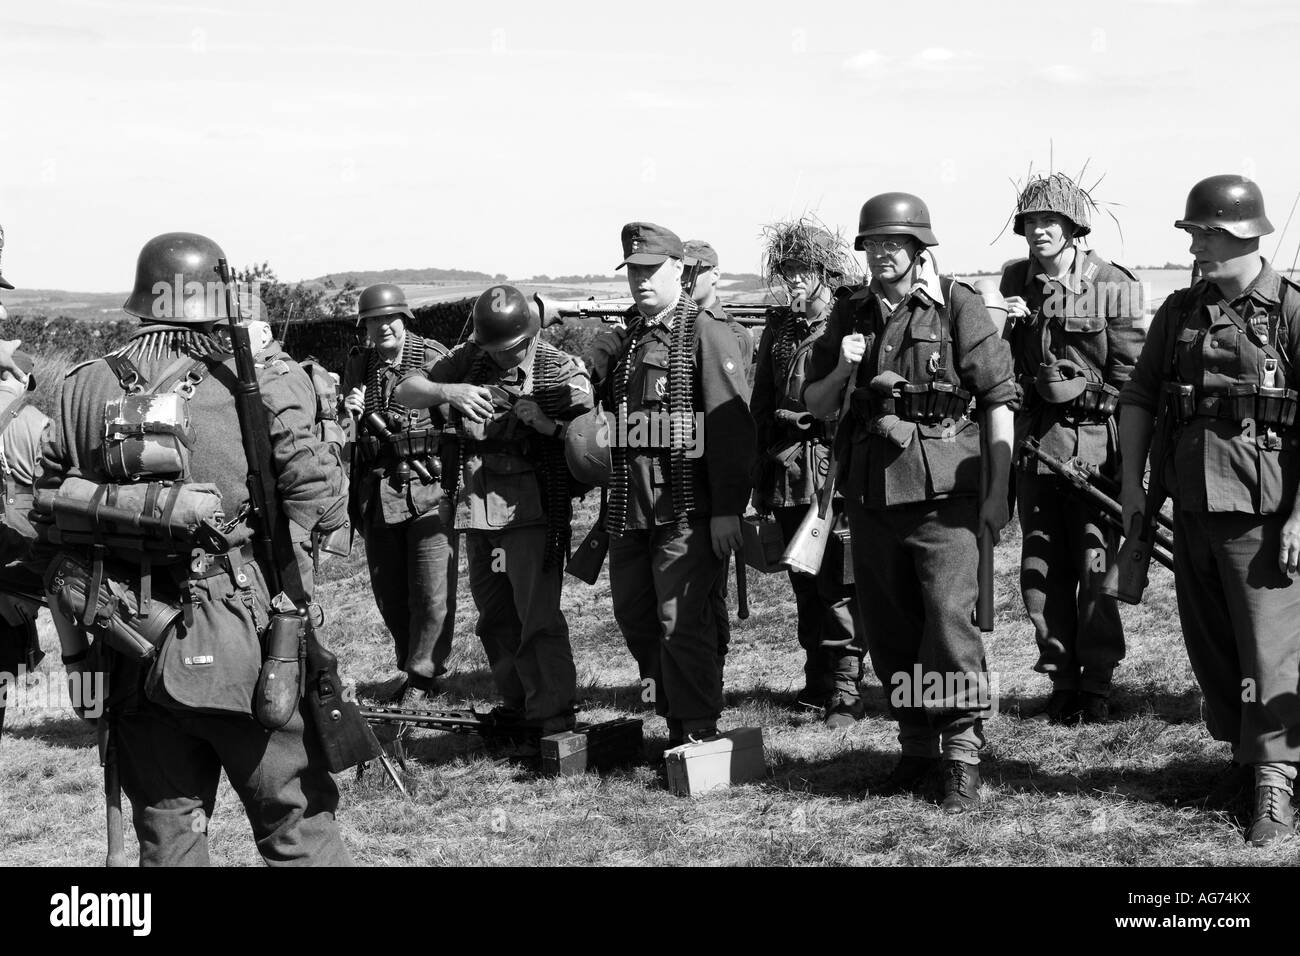 WW2 era German infantry soldiers on Parade in Normandy France 1944 Stock Photo